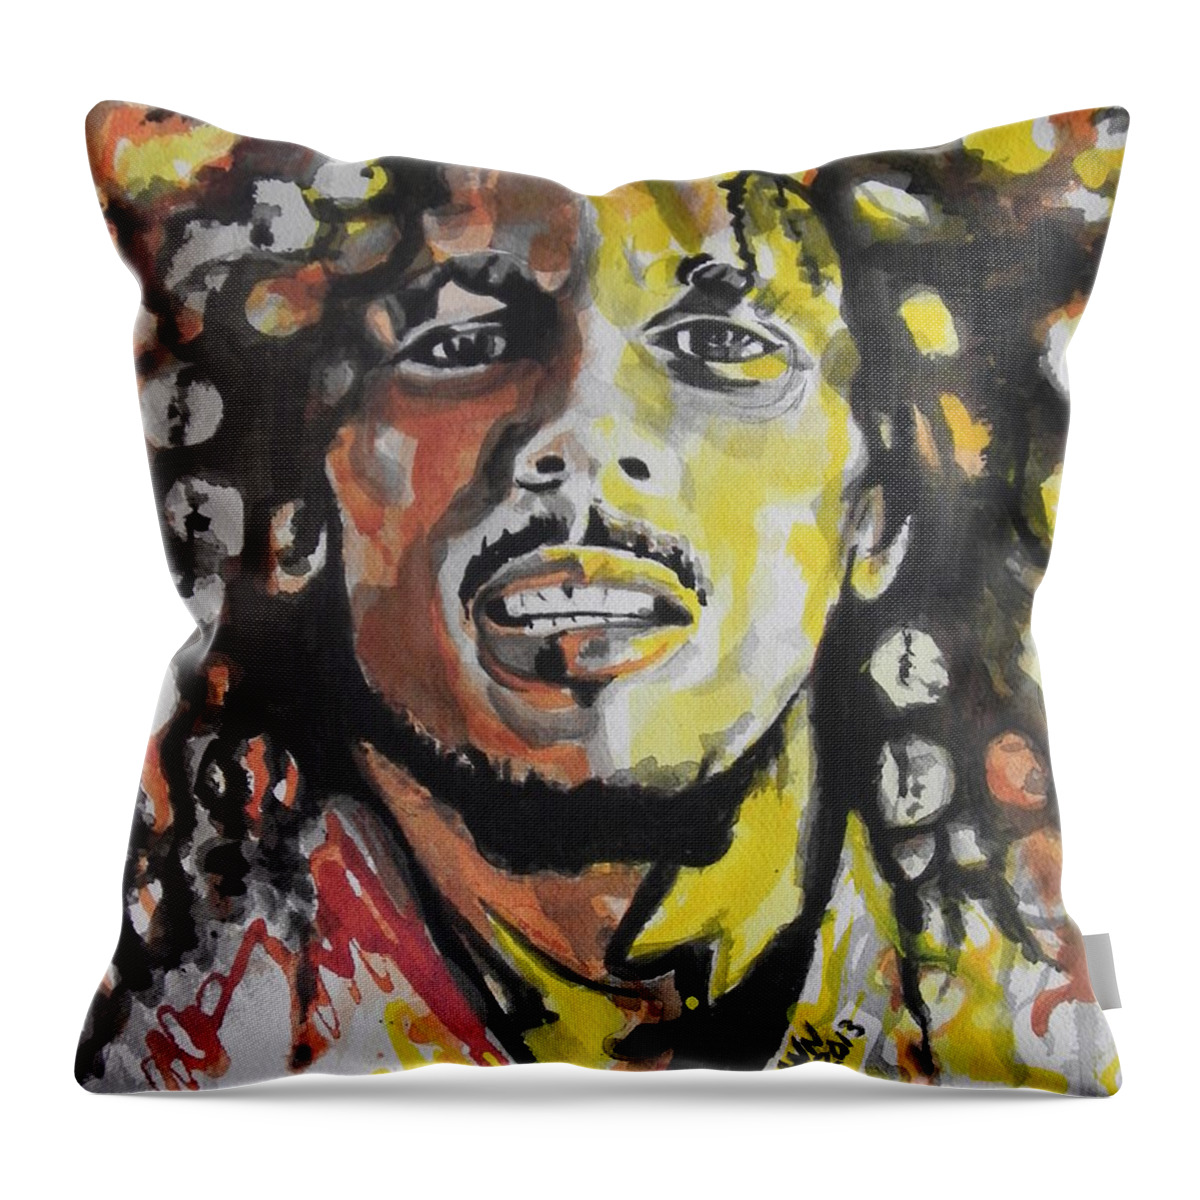 Watercolor Painting Throw Pillow featuring the painting Bob Marley 01 by Chrisann Ellis